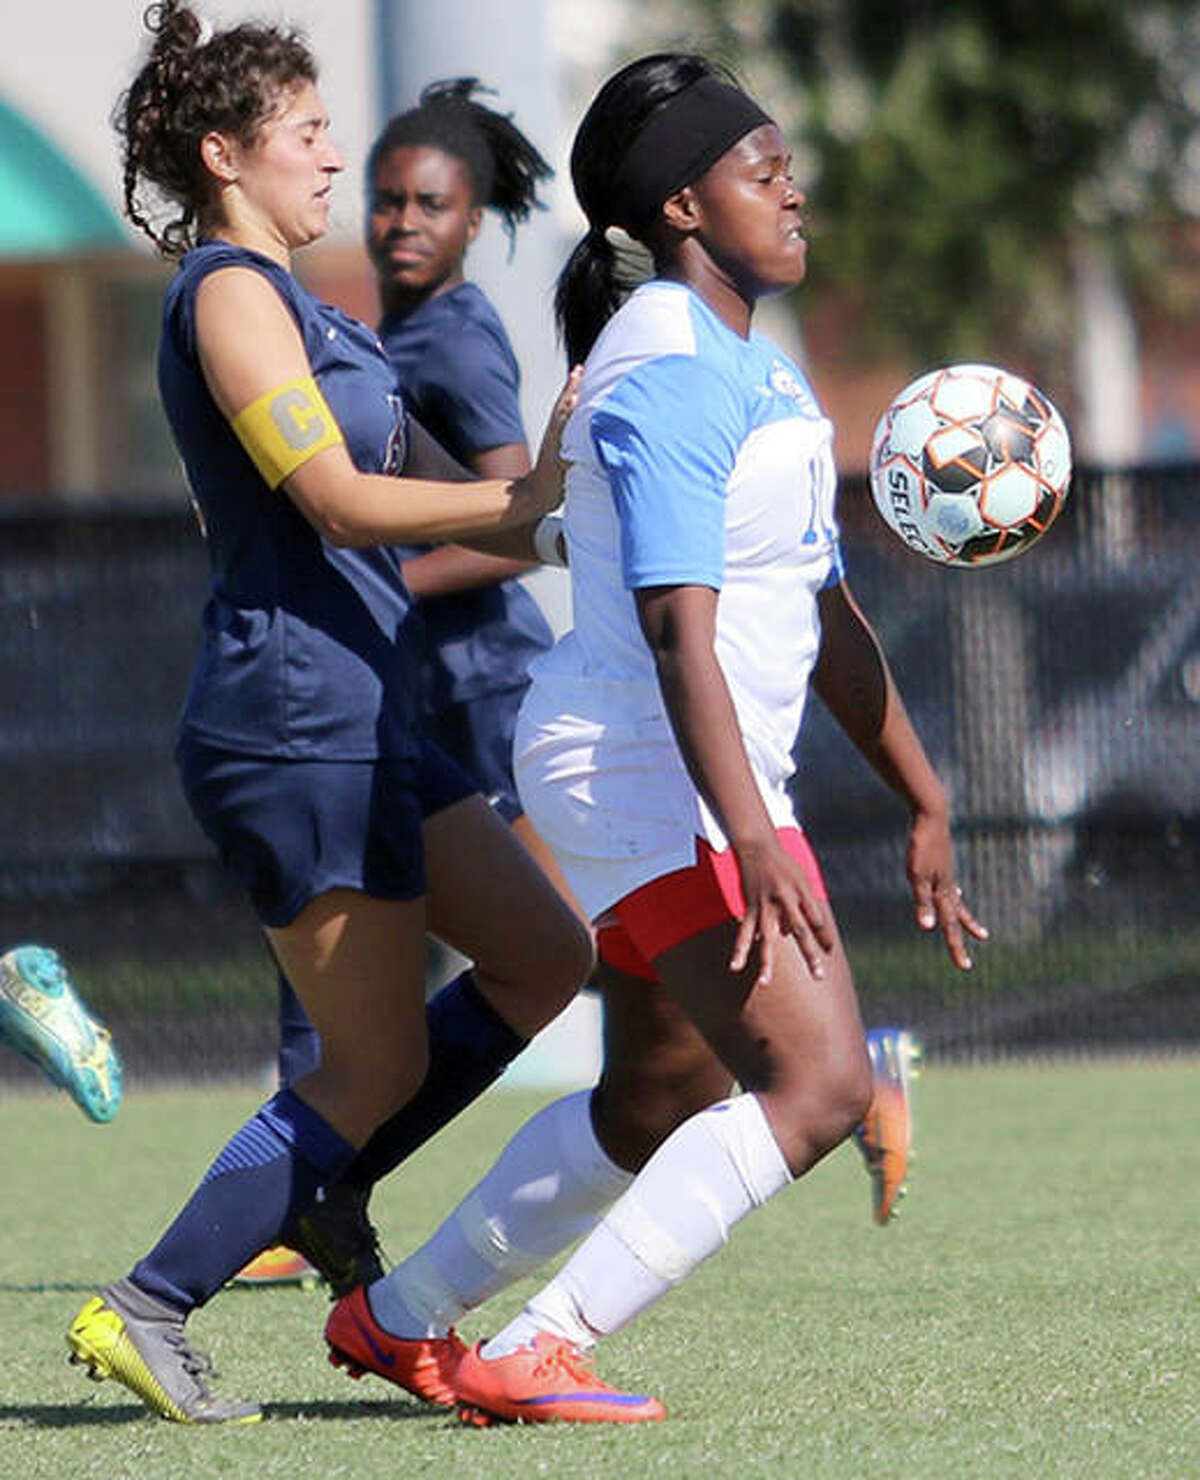 Boitumelo Rabale of LCCC, right, settles the ball while being marked by a Hill College player Wednesday at the NJCAA National Soccer Tournament in Melbourne, Fla.